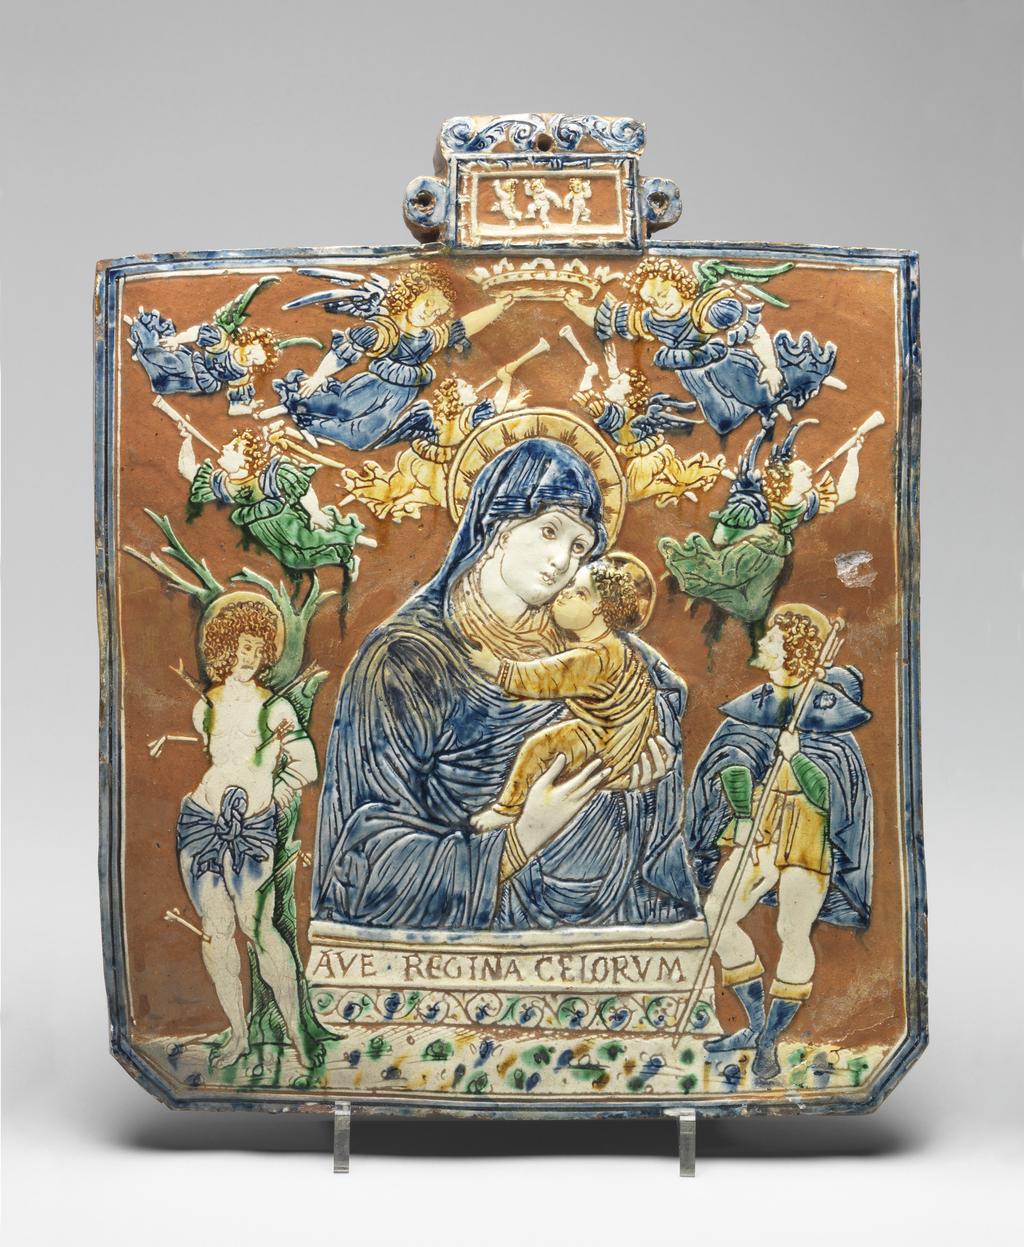 An image of Panel. The Virgin with Saints Roch and Sebastian. Unknown, perhaps The Veneto. Almost square with cut lower corners and a rectangular, scrolled protrusion at the top, with lateral rings and a hole for suspension. A half-length figure of the Virgin holding the Christ Child in her arms, with below, a pedestal inscribed 'AVE.REGINA CELORVM' (Hail Queen of the Heavens), and above, seven angels, of whom two hold a crown over her head and four blow trumpets. St Roch stands on the right hand and St Sebastian on the left. The small panel at the top contains three dancing putti. Pale red earthenware, moulded in very low relief in the middle, and coated with white slip which has been removed from the background. Incised decoration coloured blue, green and dark yellow under lead glaze. Height, whole, 33.7 cm, width, whole, 27.8 cm, depth, whole, 1.7 cm, circa 1500-1510. Renaissance.